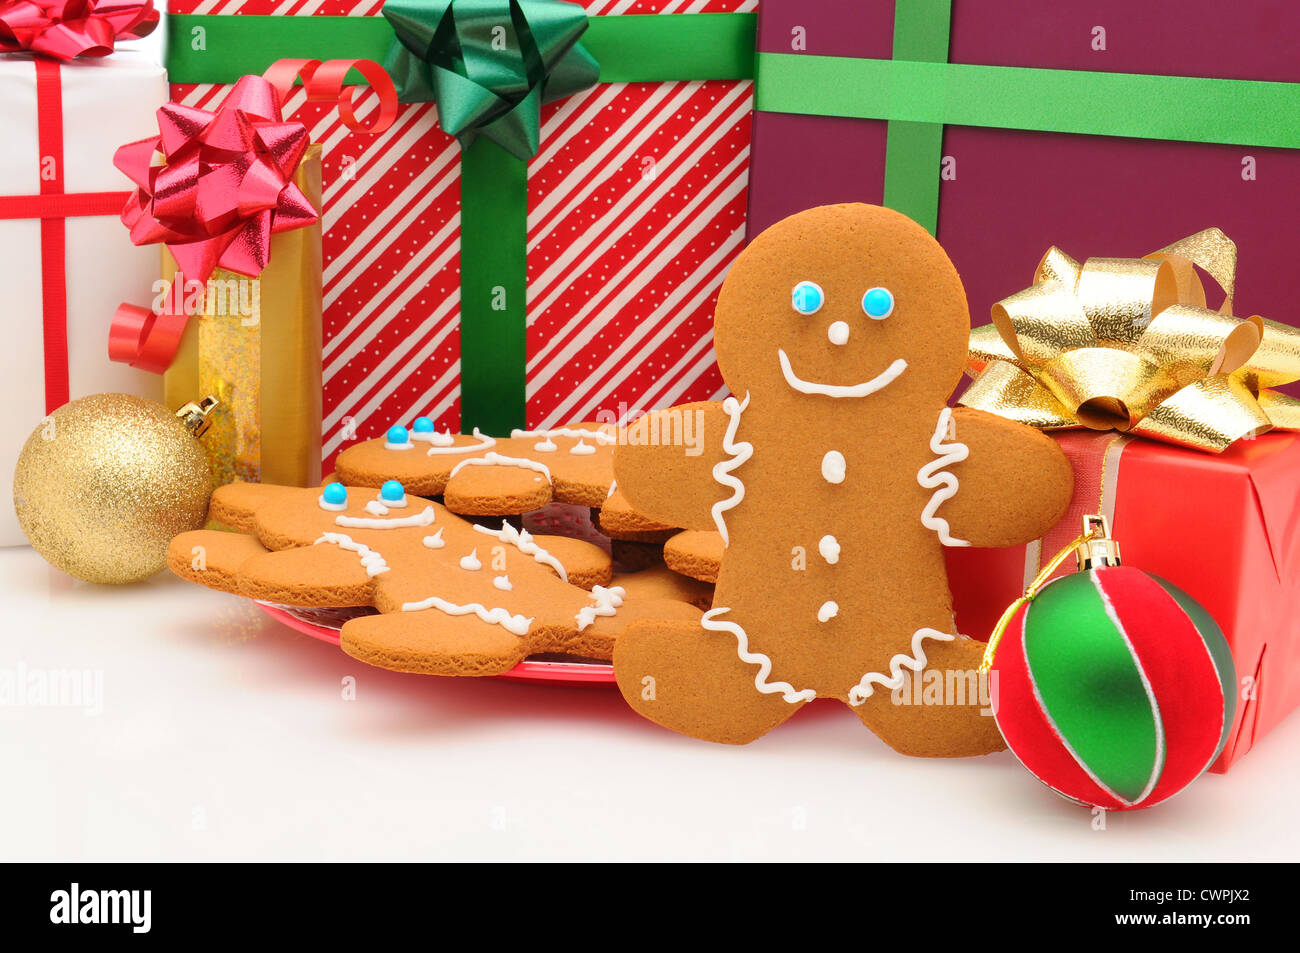 A plate of Ginger Bread Man cookies in front of Christmas presents. Horizontal format. Stock Photo